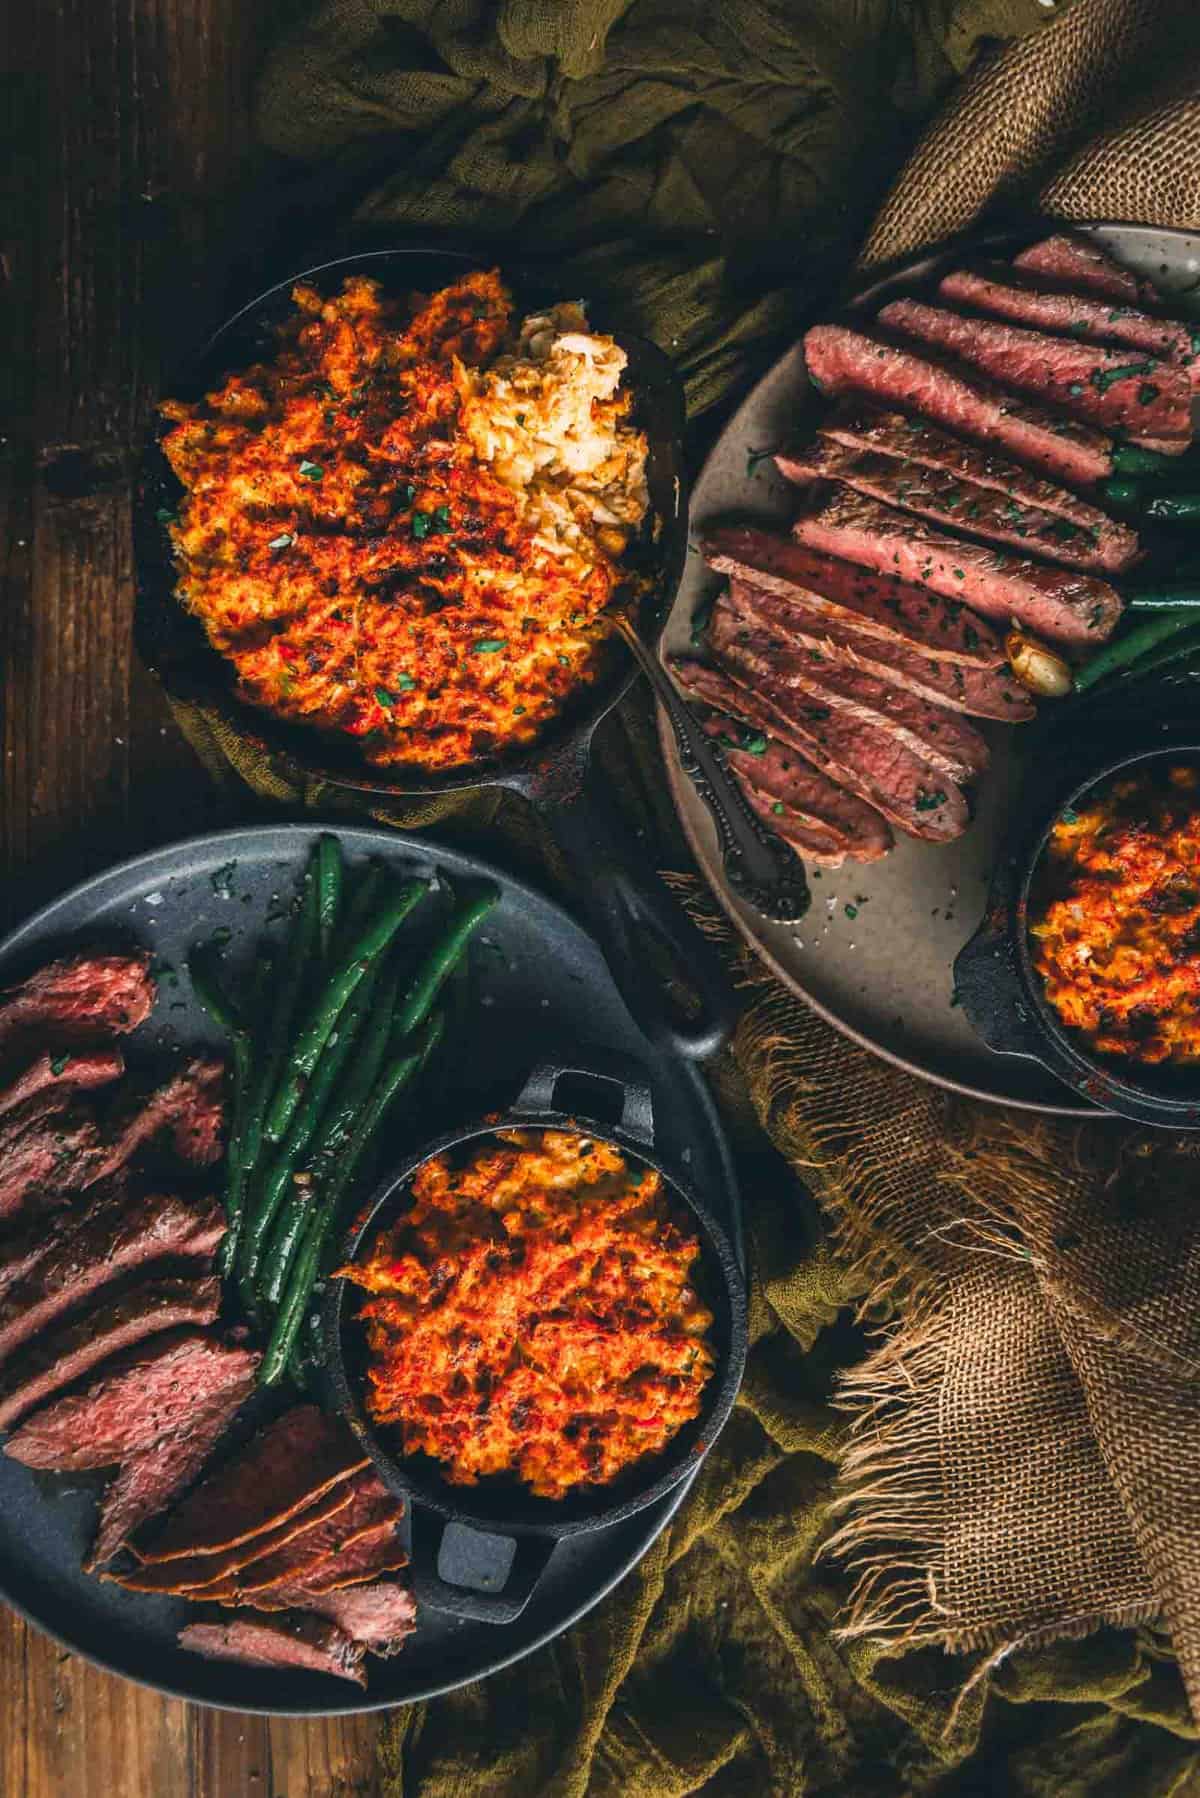 Table with plates of steak, green beans and crab in skillets.